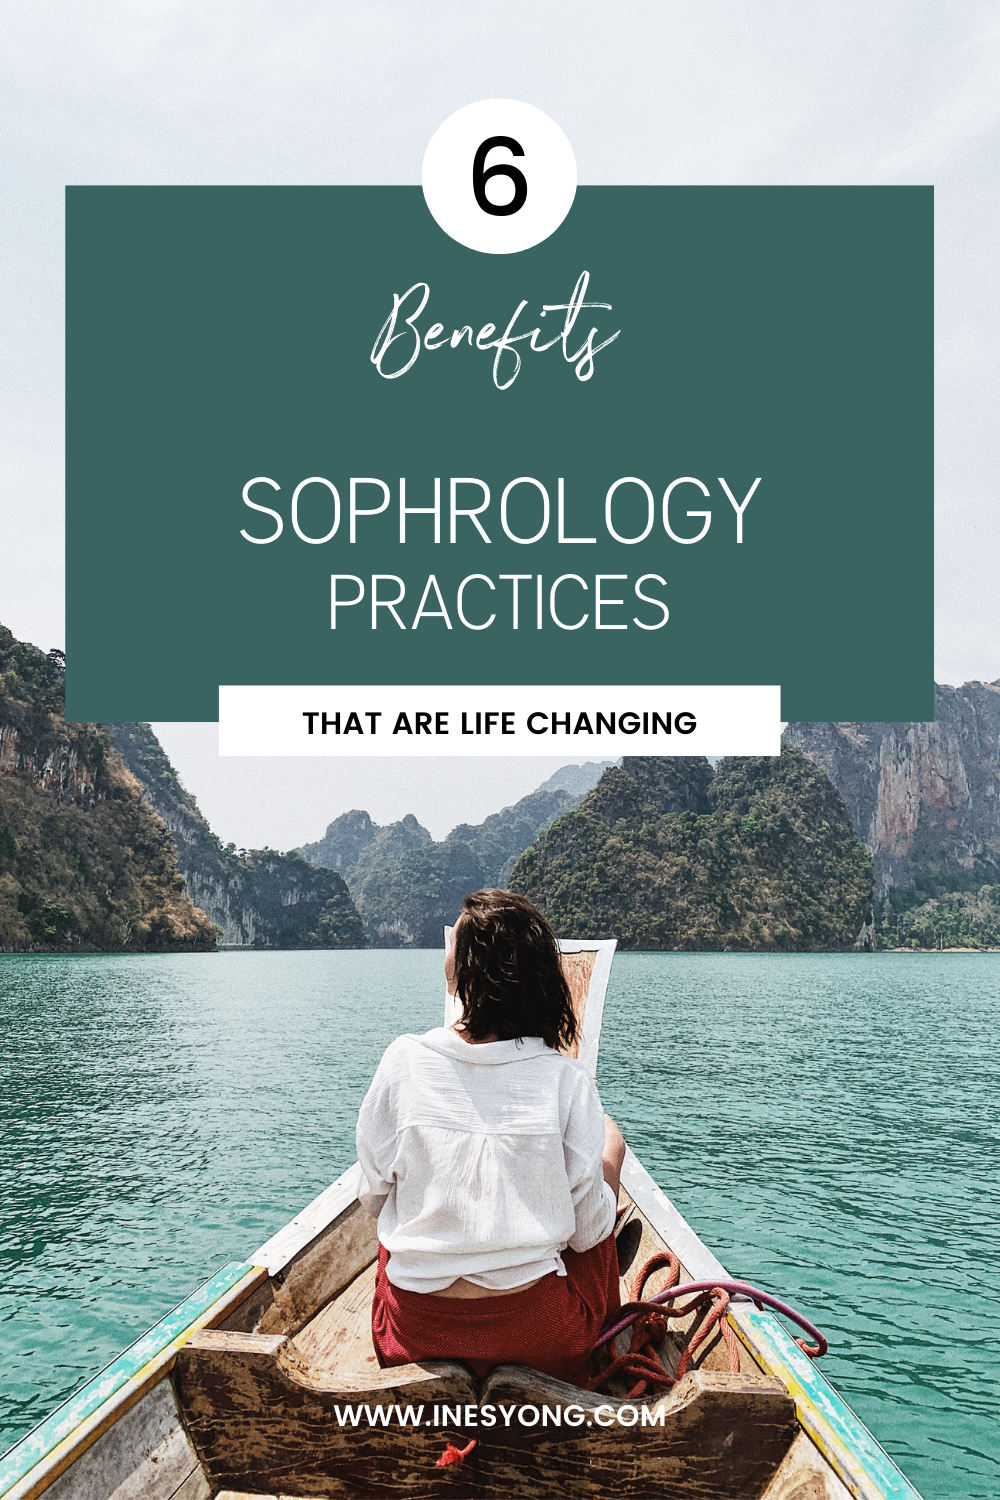 blog graphic 6 Benefits of sophrology practices